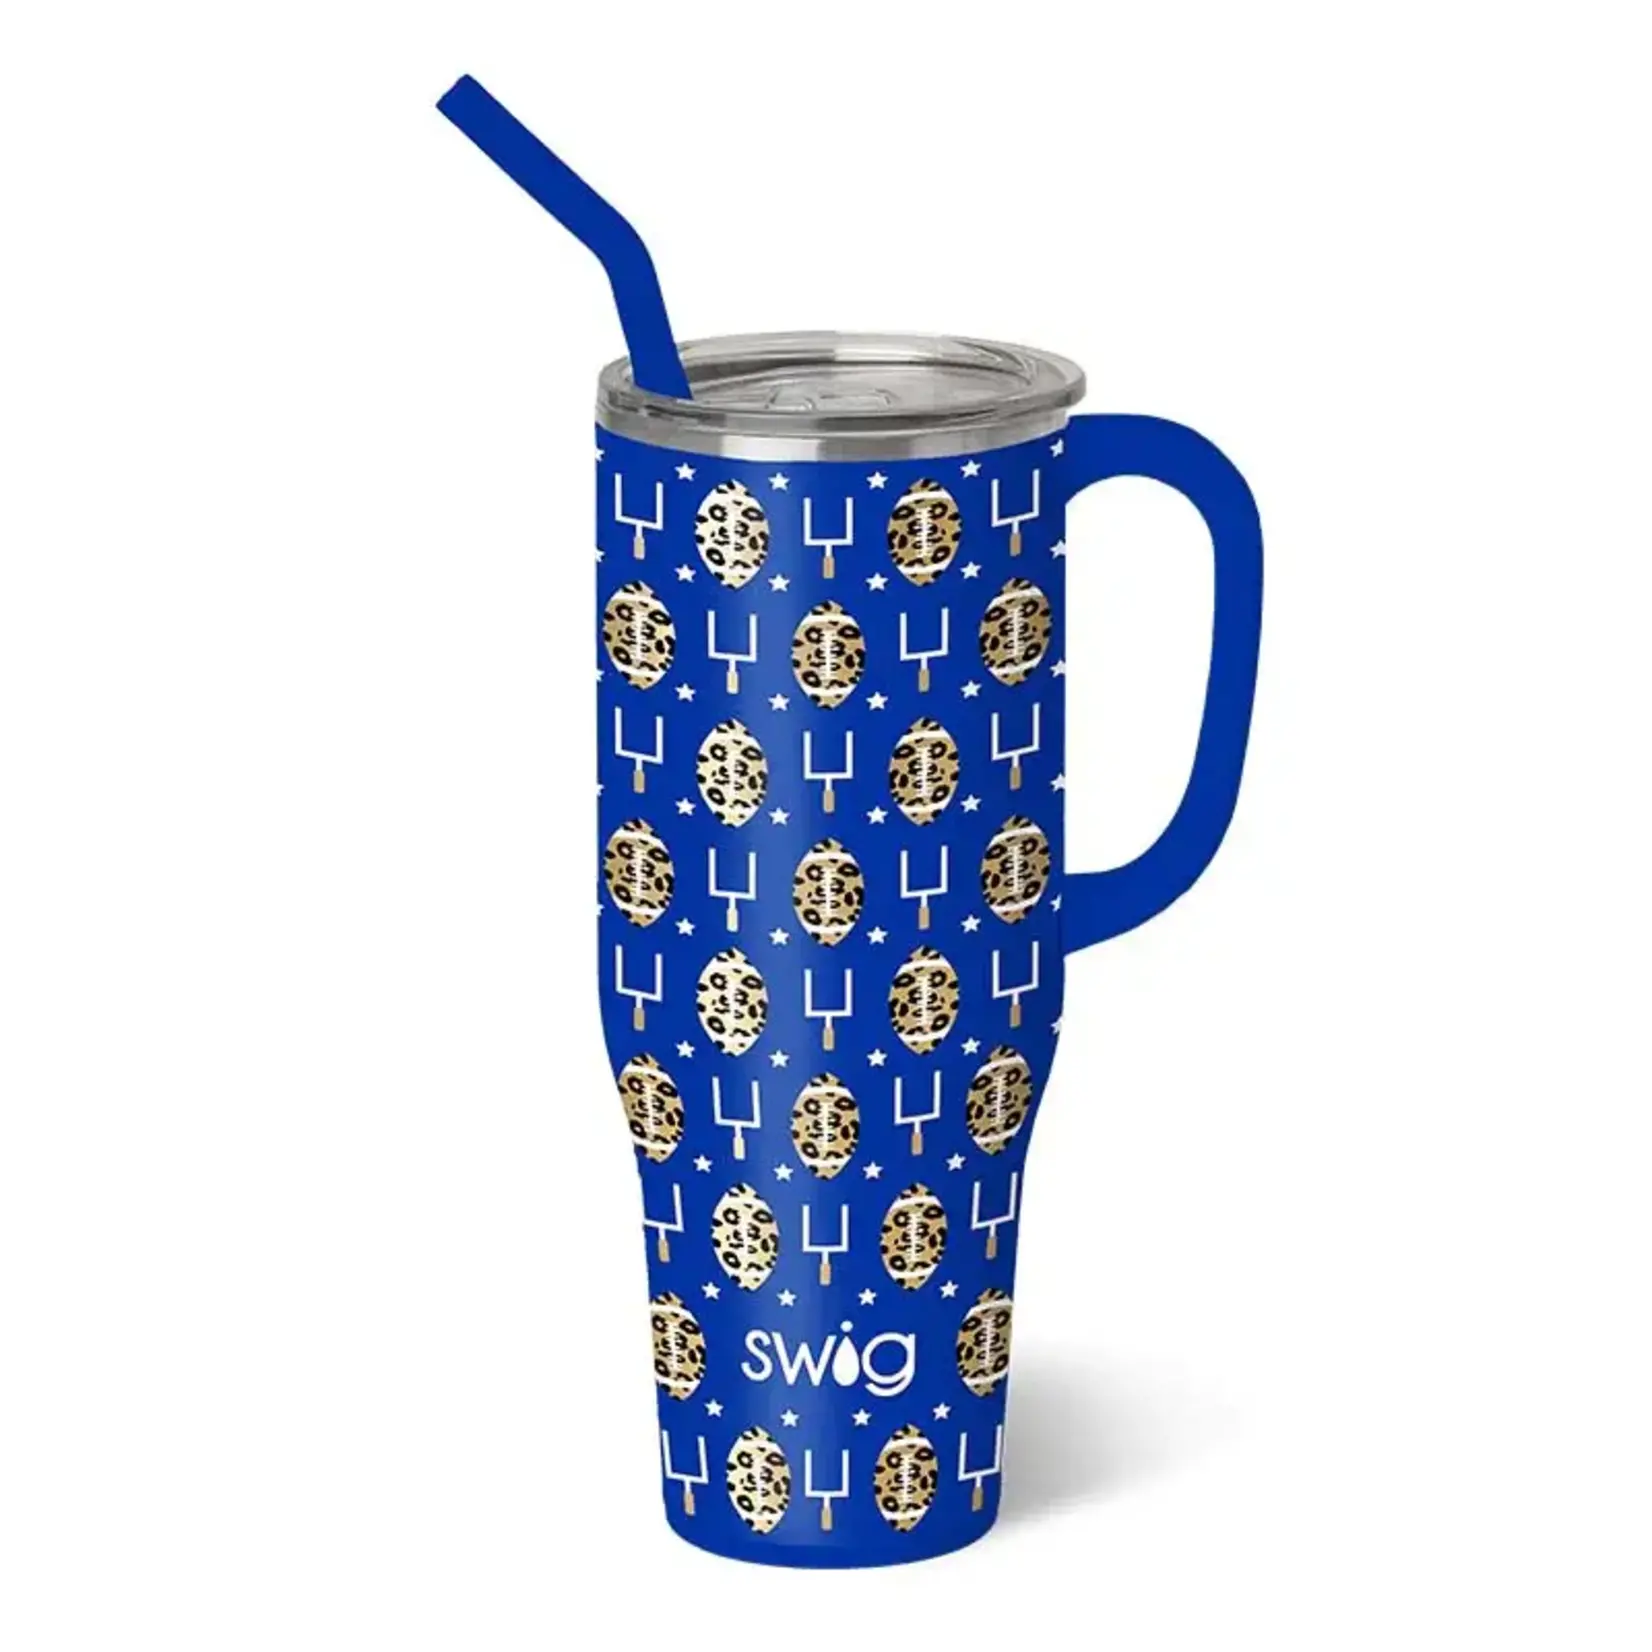 Swig 40 oz Mega Mug - Touchdown Purple / Gold Swig Visit our online store!  We have what you're searching for